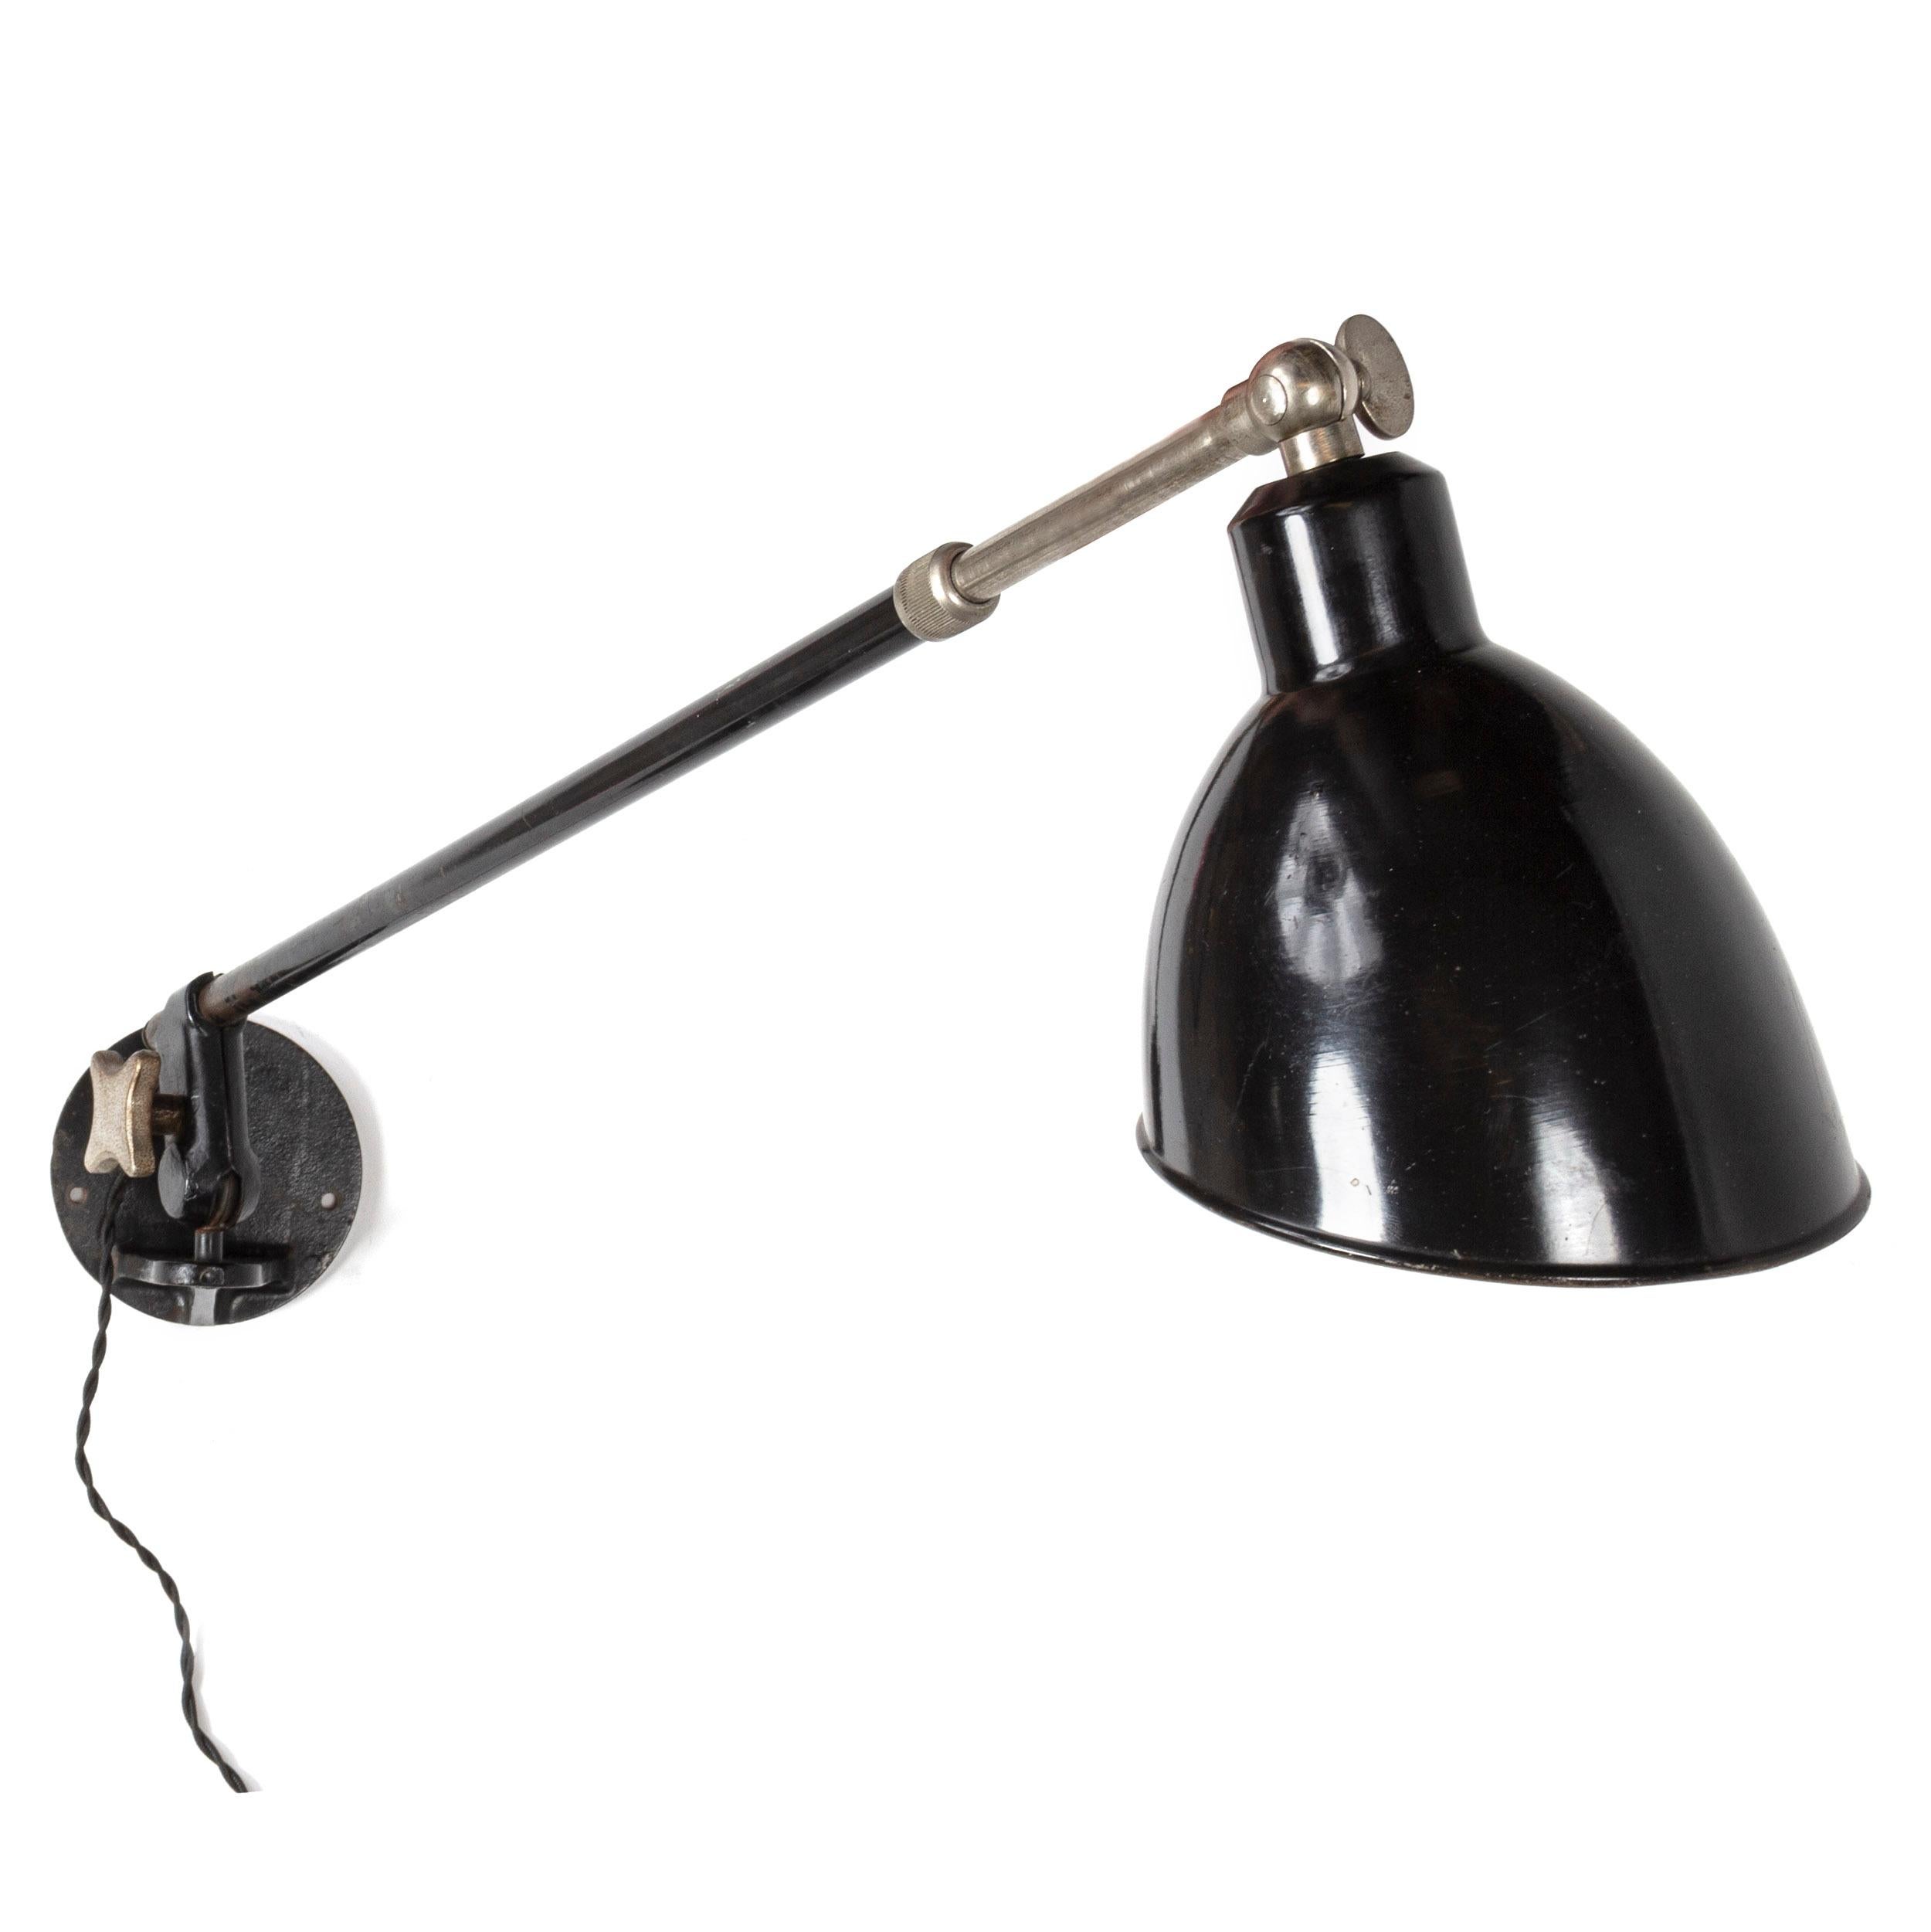 A telescoping industrial wall lamp with a pivoting bracket and adjustable arm supporting a black enameled steel shade.